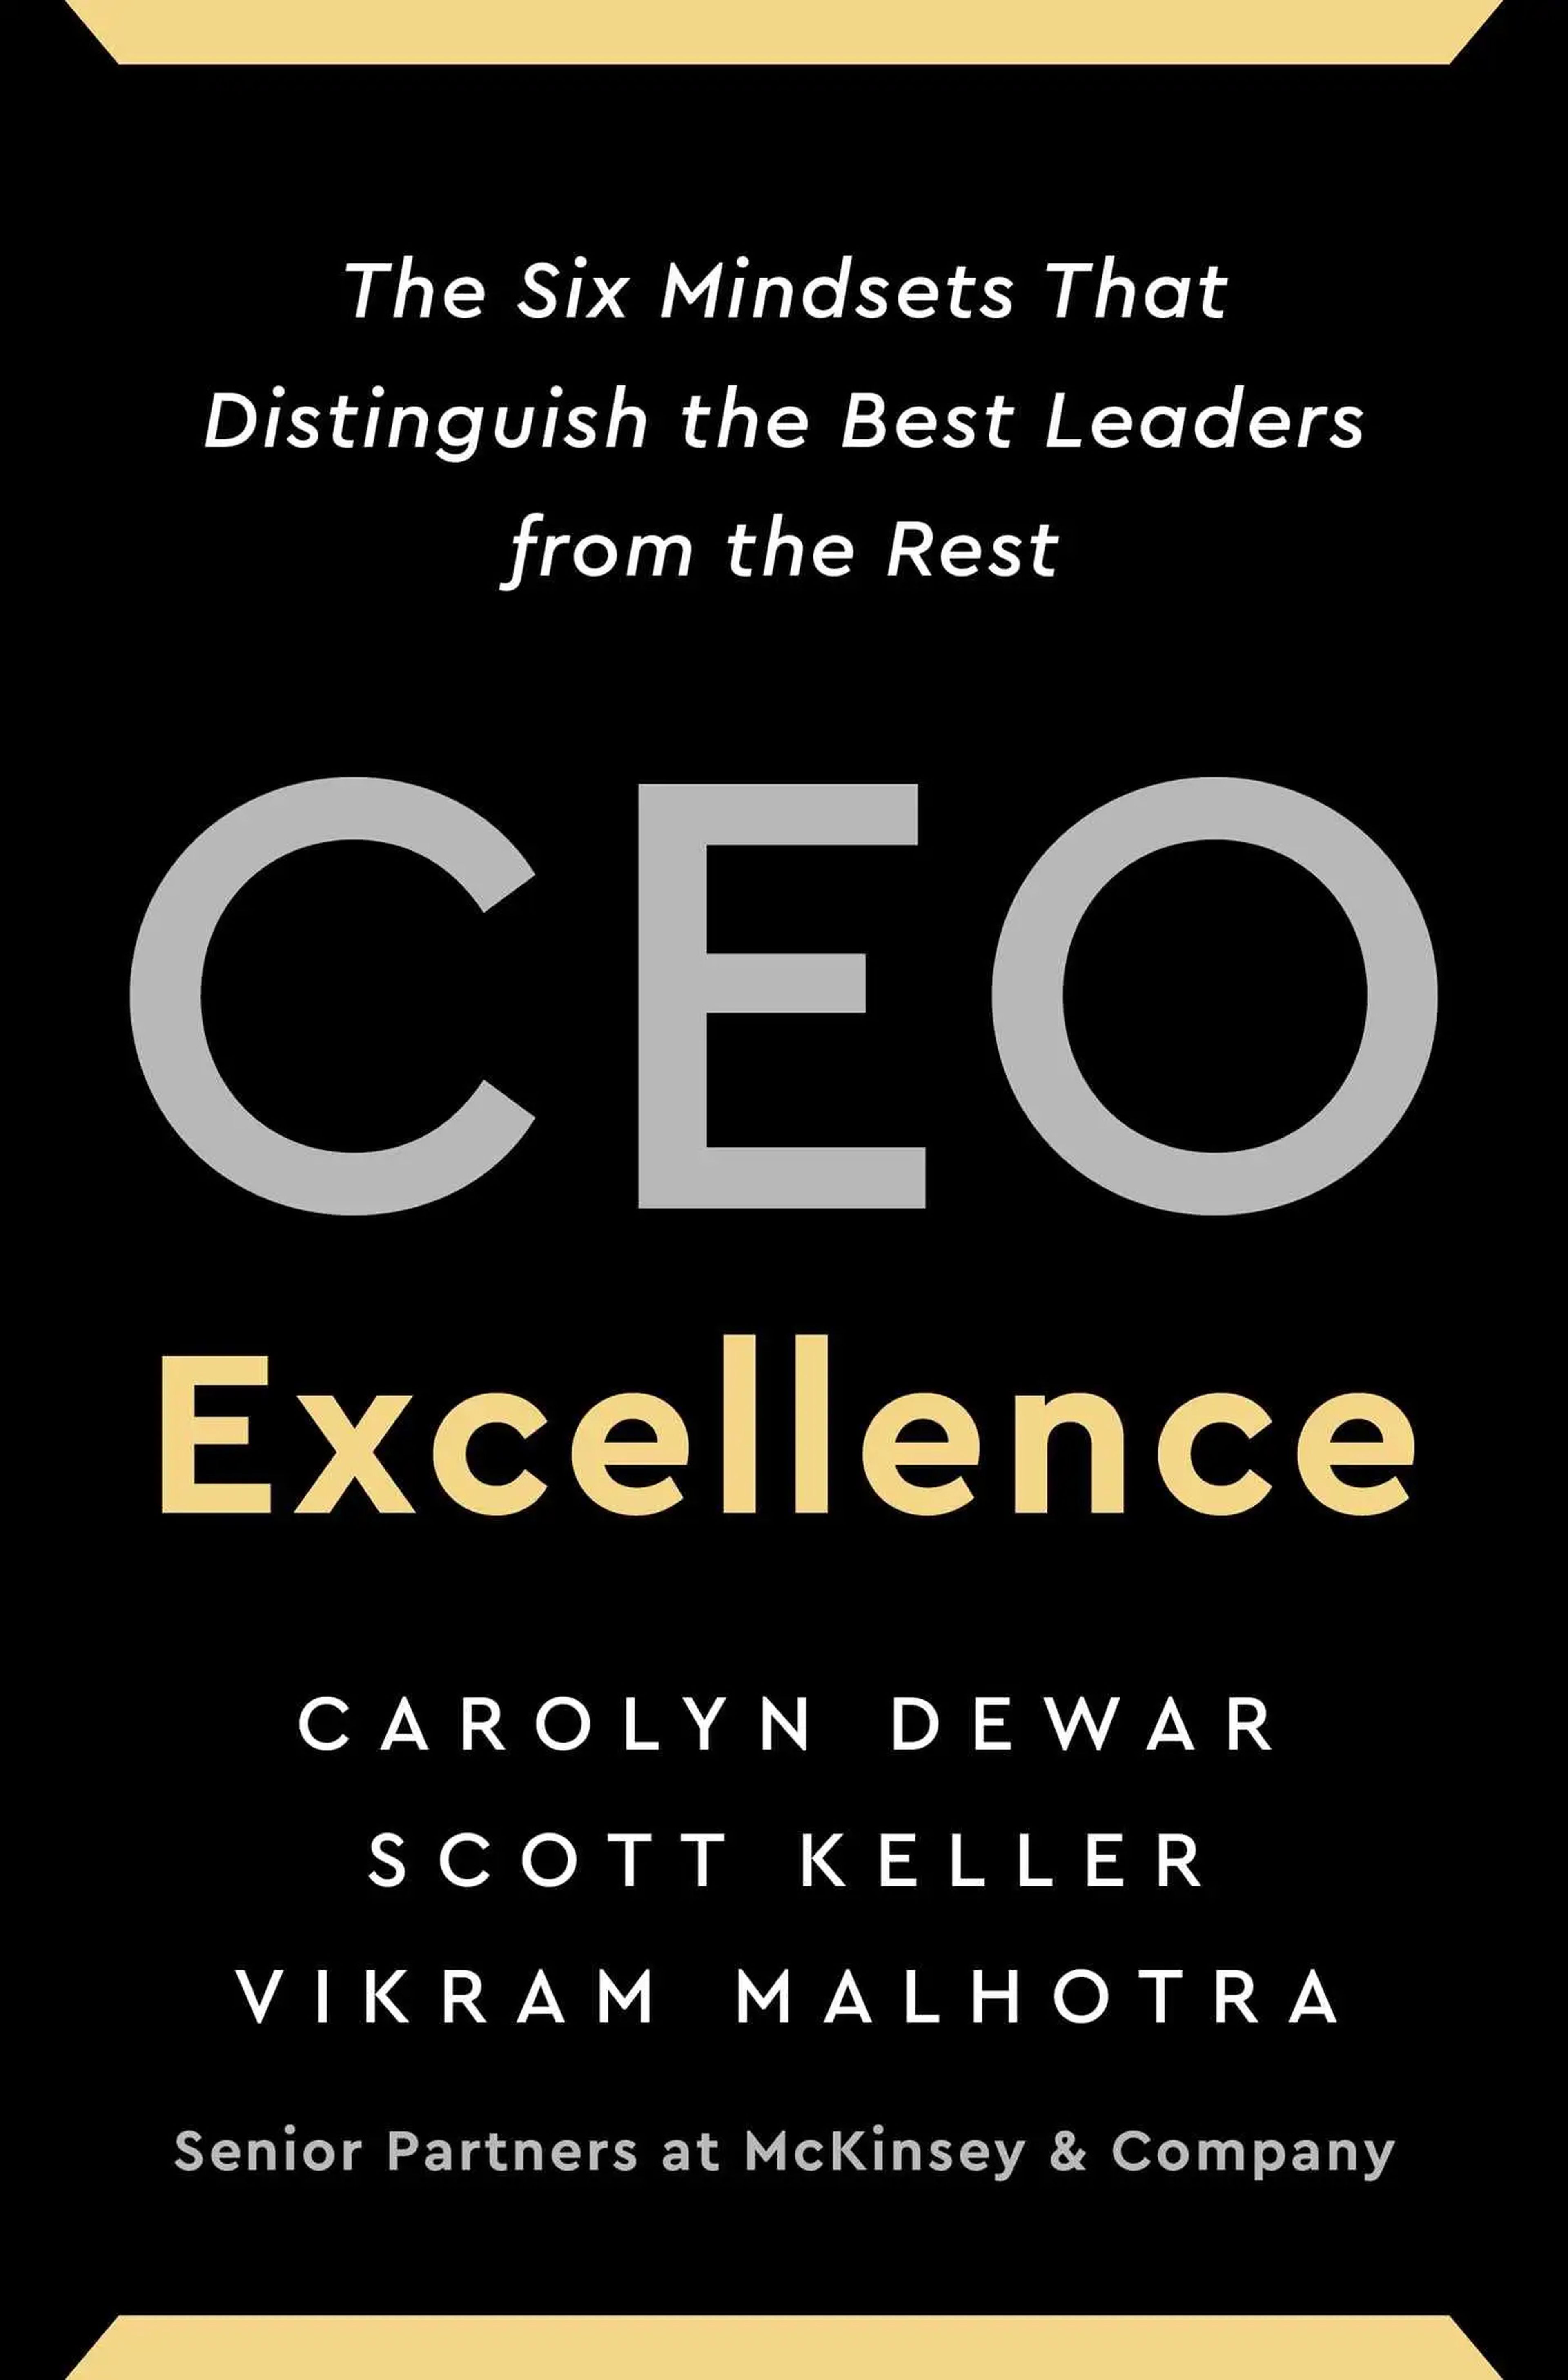 "CEO Excellence: The Six Mindsets That Distinguish the Best Leaders from the Rest".